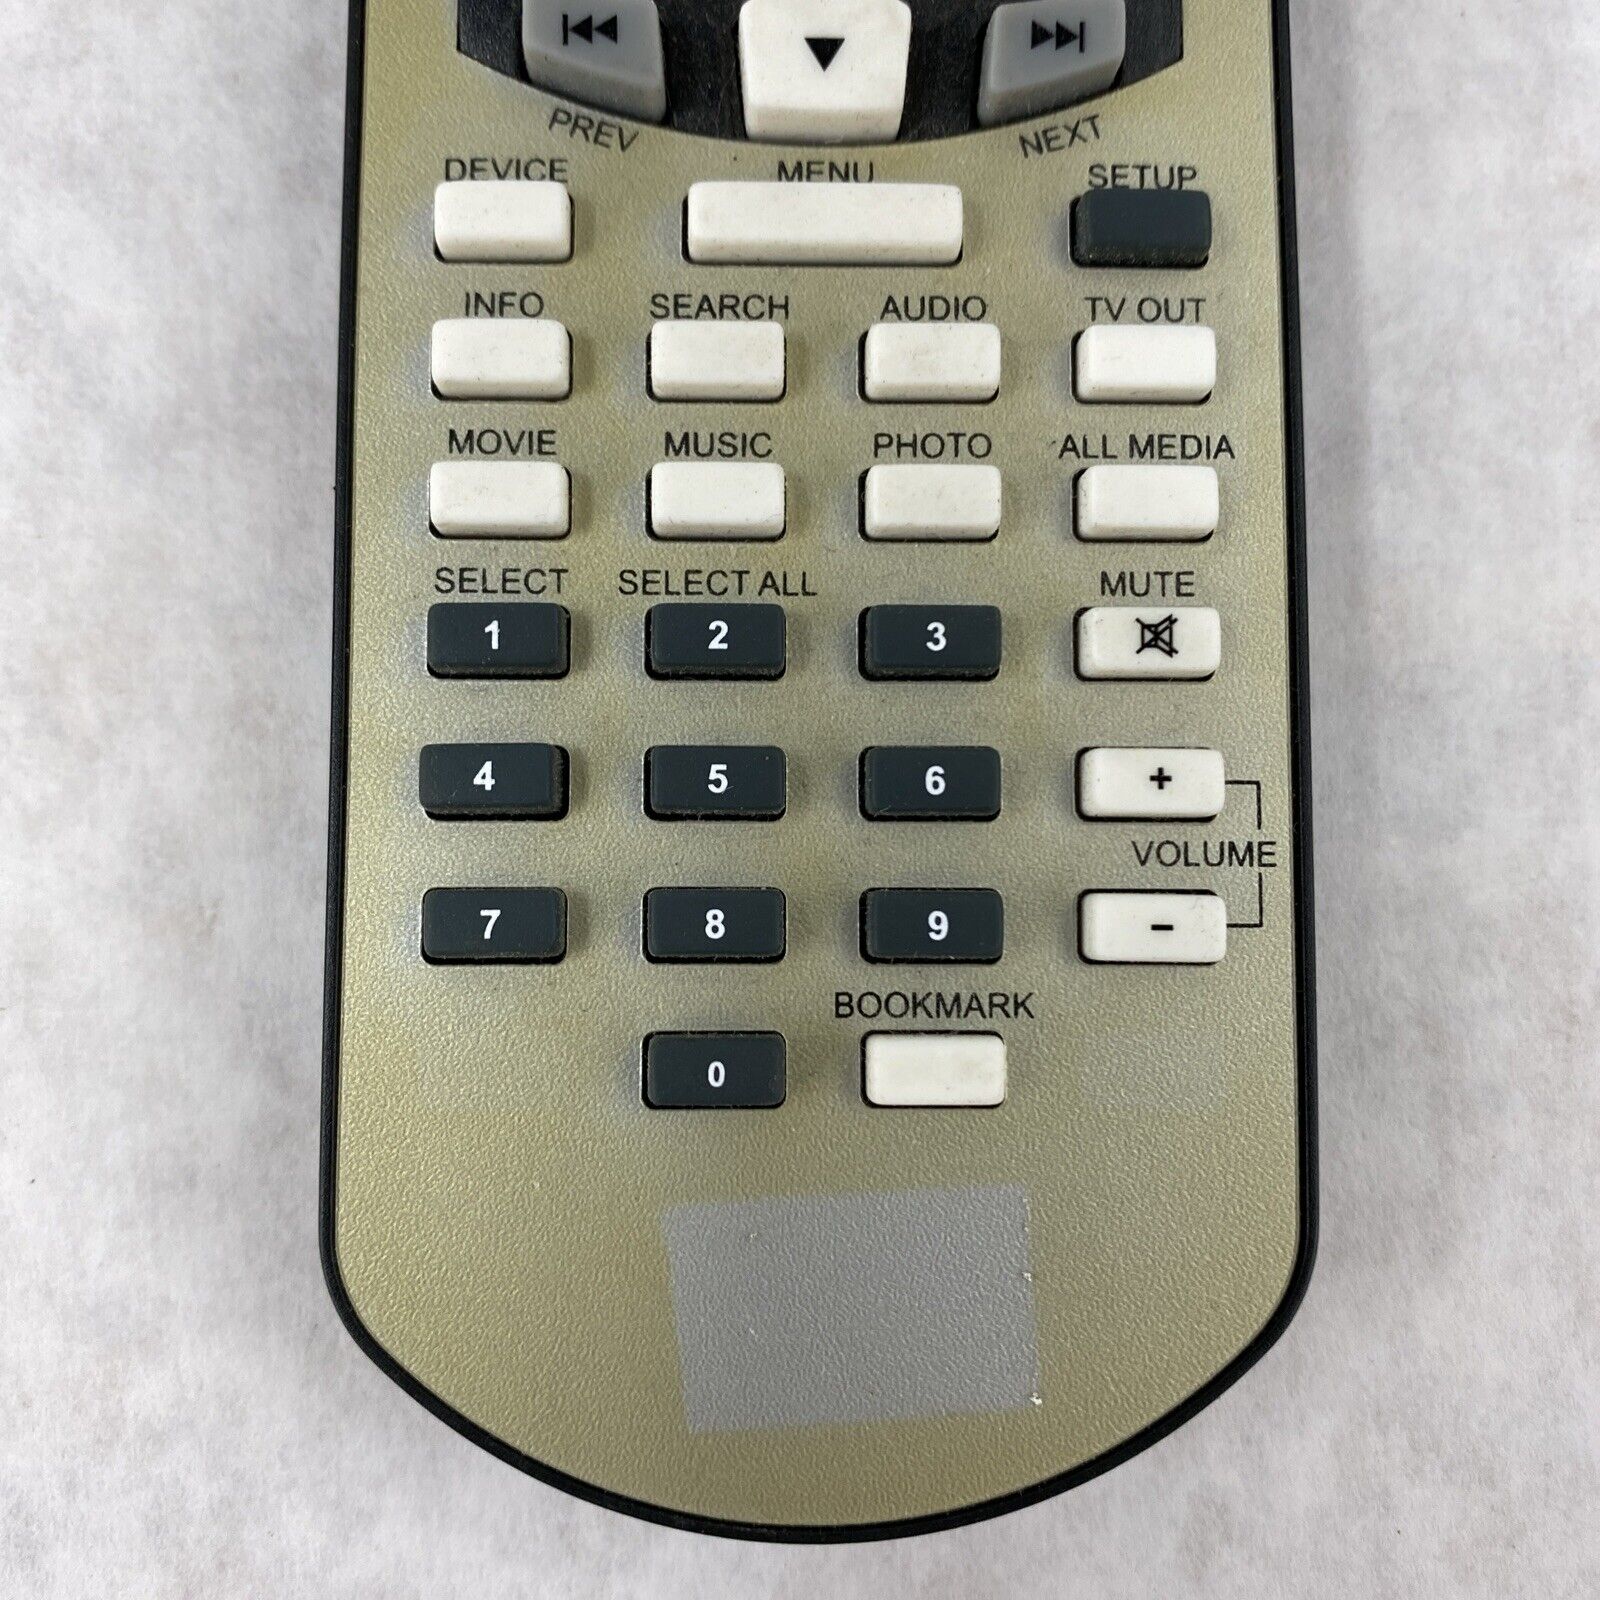 Remote Control for MediaGate MG-35 Multimedia (3.5") Hard Disk Player